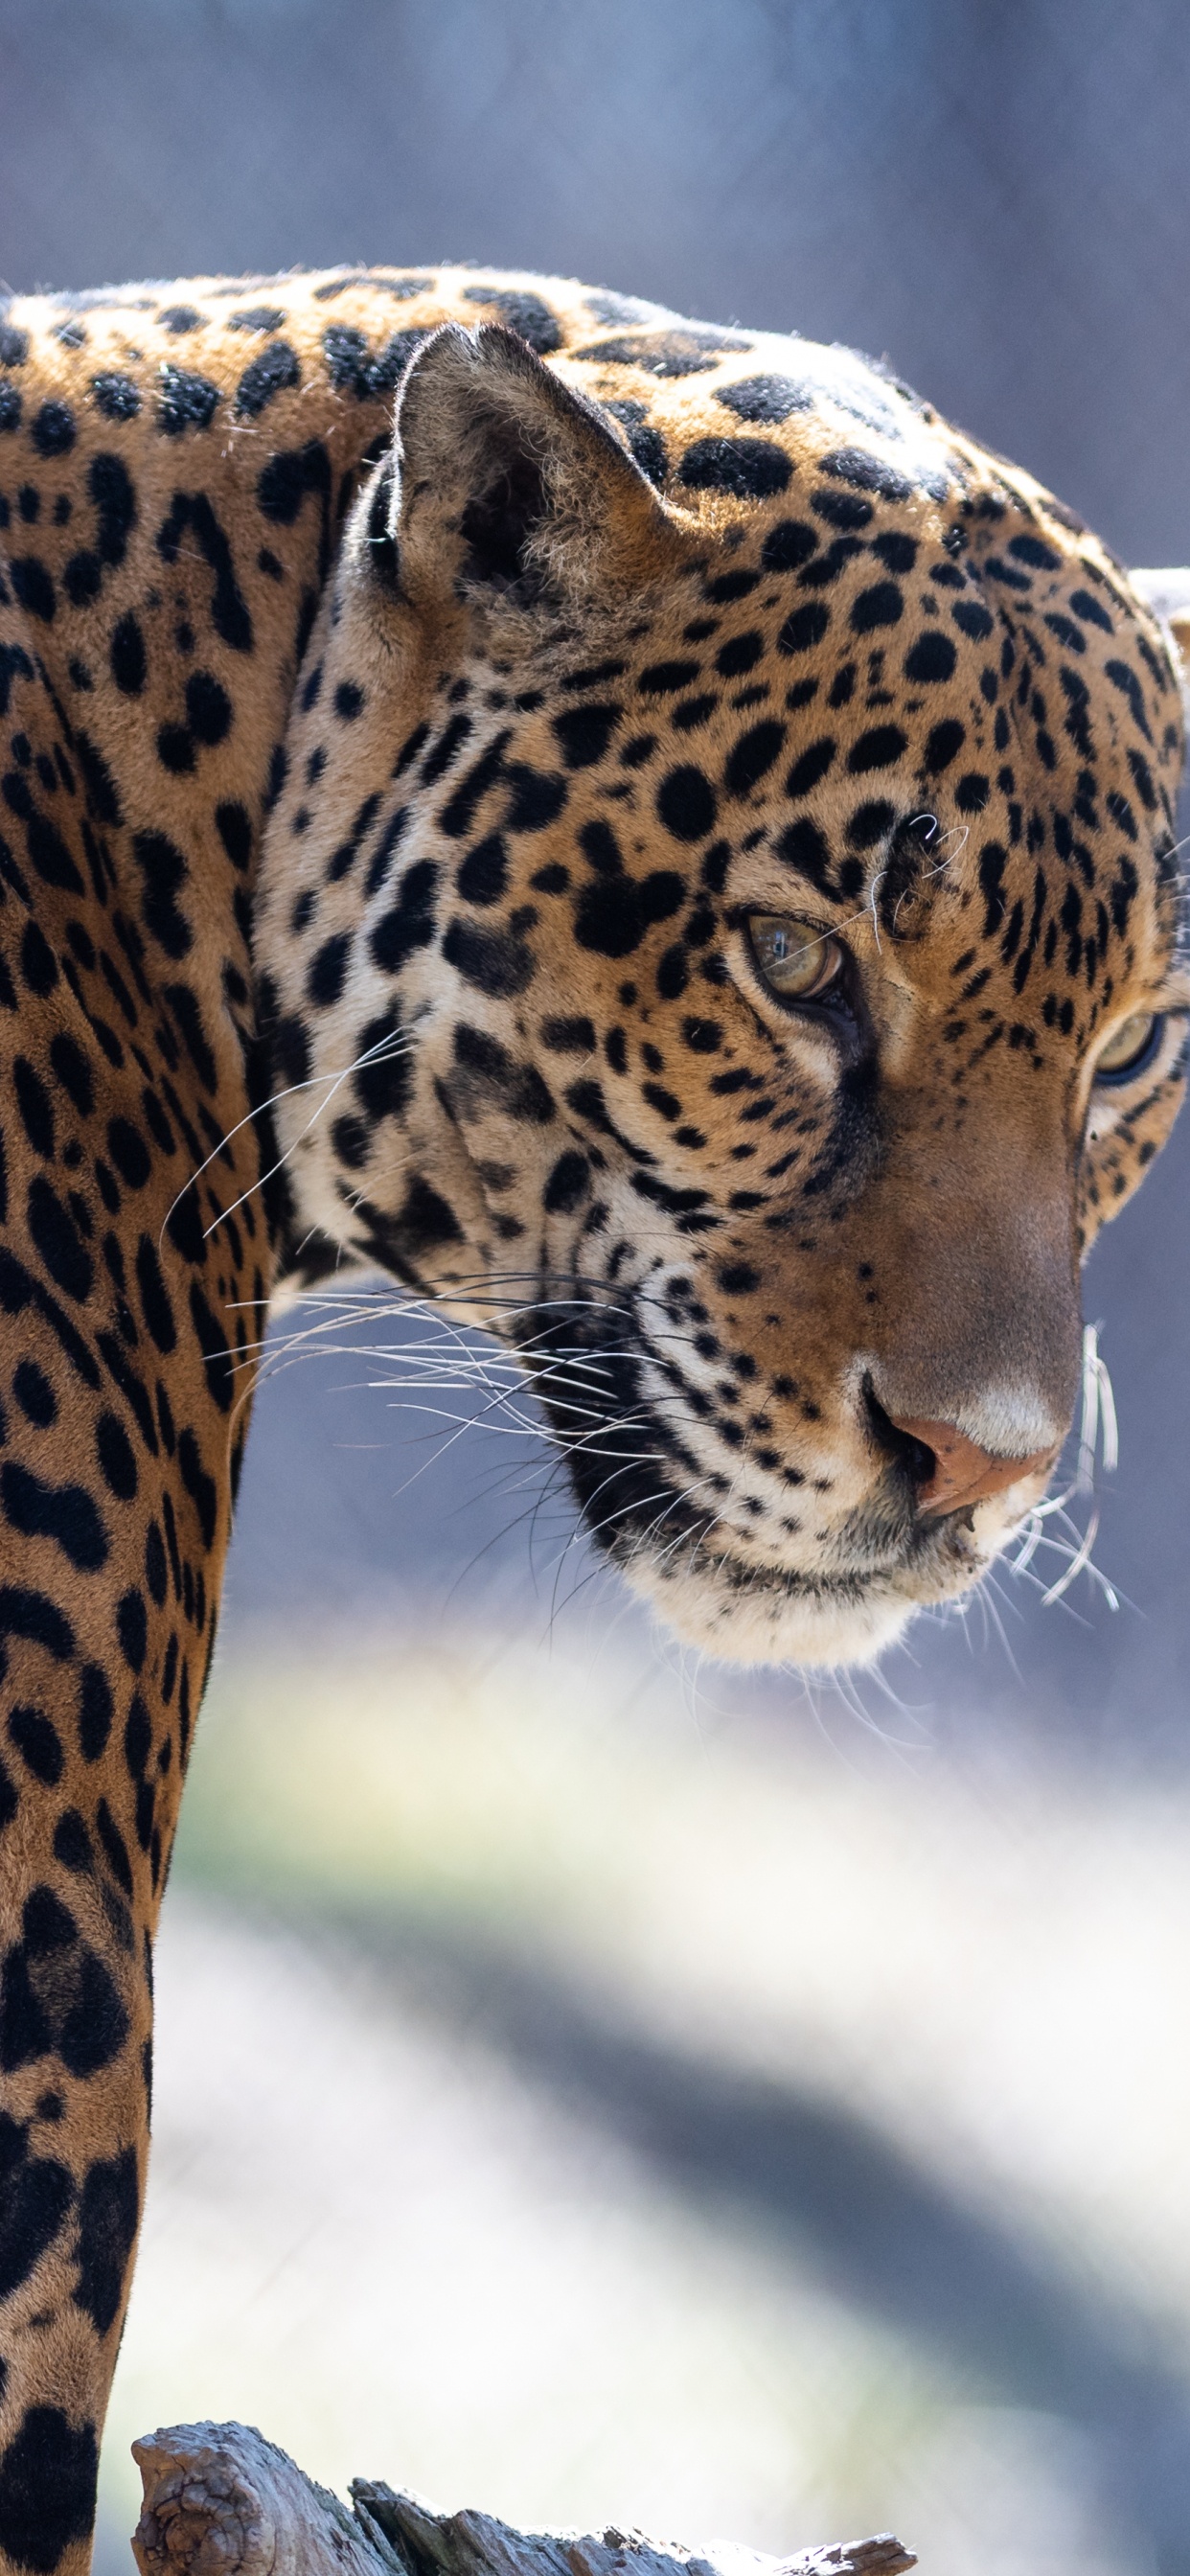 Brown and Black Leopard in Close up Photography. Wallpaper in 1242x2688 Resolution